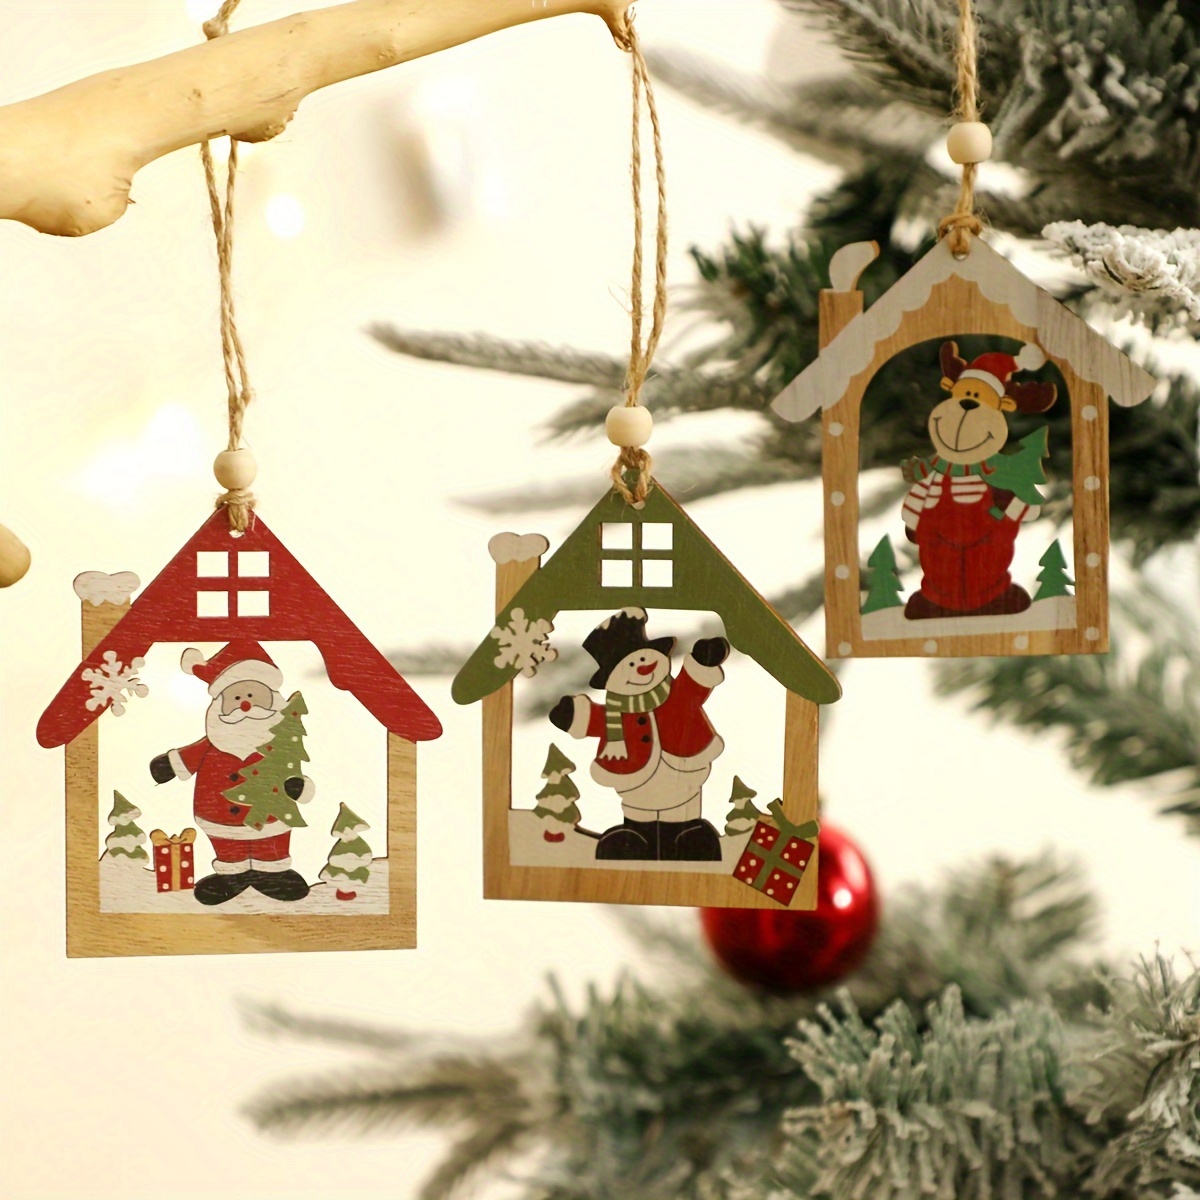 Clearance! EQWLJWE 2pcs Wooden Christmas Farmhouse Rustic Ornaments, Wooden  Hanging Ornaments Set for Christmas Tree Decorations, 3-Layer Carving